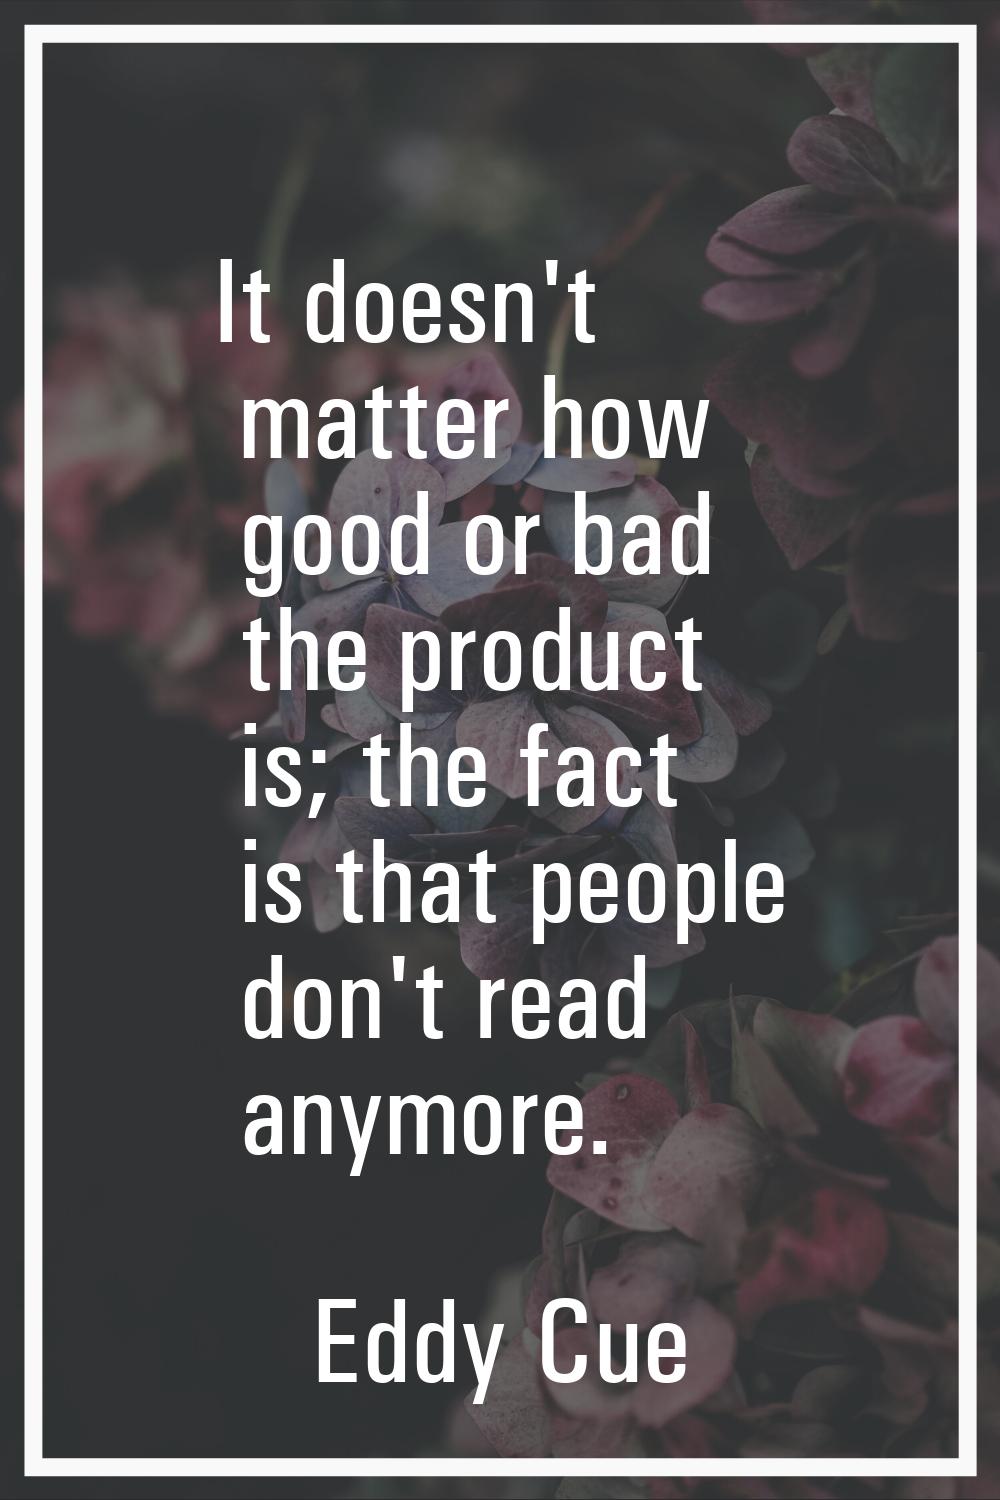 It doesn't matter how good or bad the product is; the fact is that people don't read anymore.